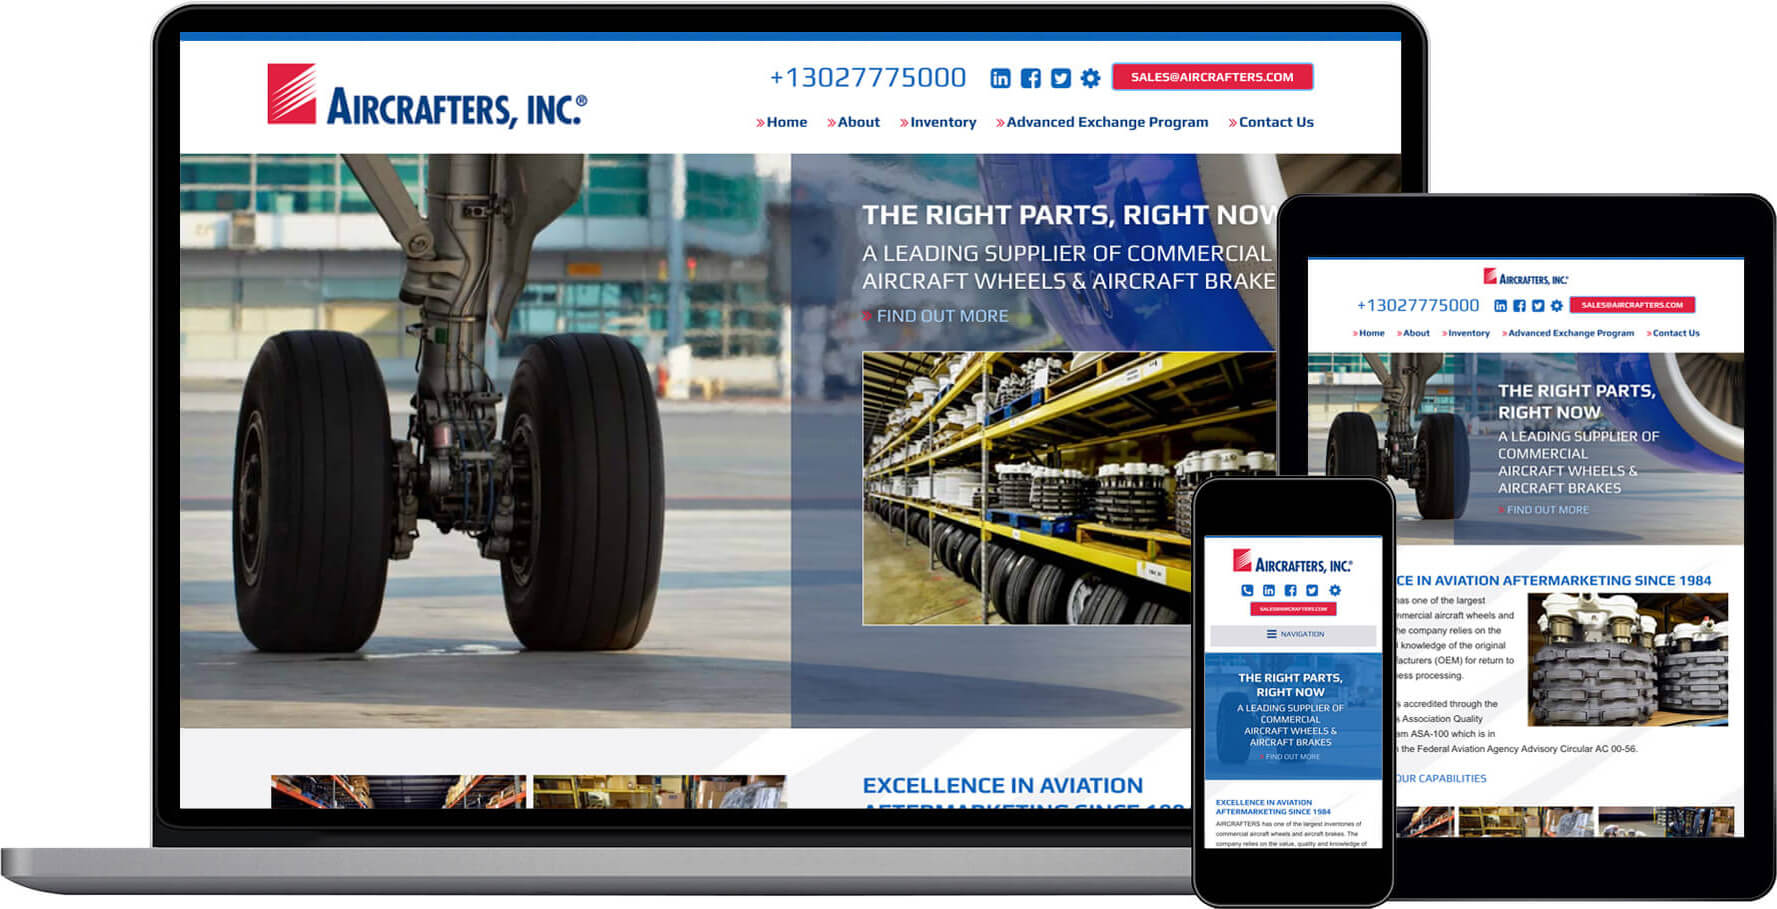 Aircrafters, Inc Responsive Website Design